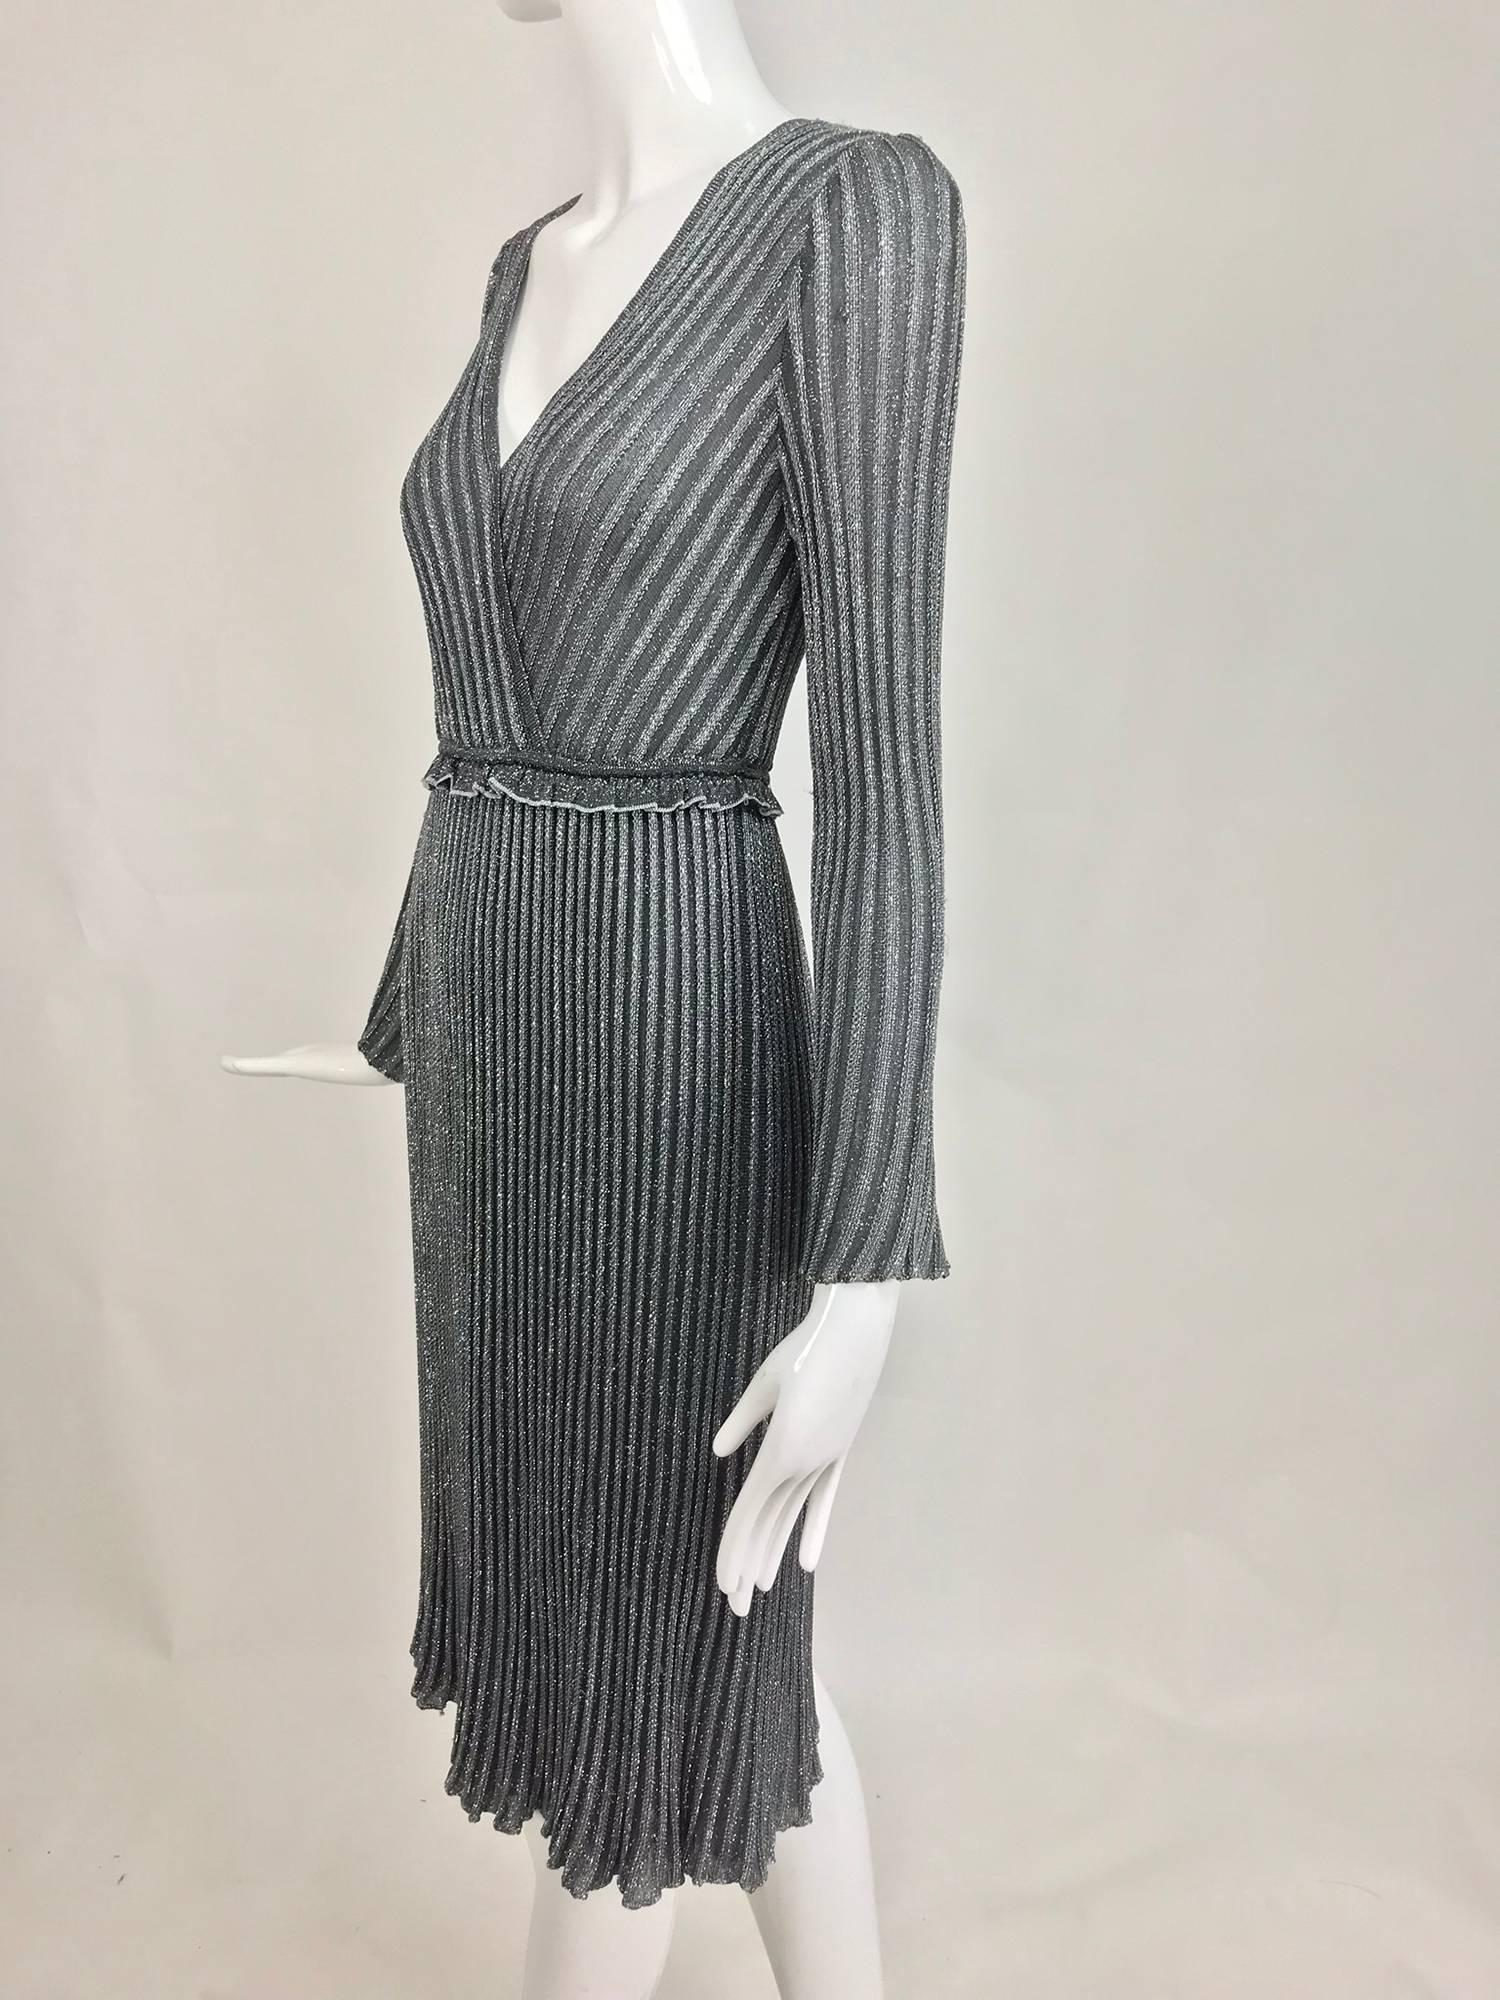 Silver metallic knit dress from the 1990s...Pull on dress has a V plunge neckline, long bell sleeves, ruffle trimmed cased elastic waist, the skirt skims the hip and flares at the hem...Fits a size small...

In excellent wearable condition... All